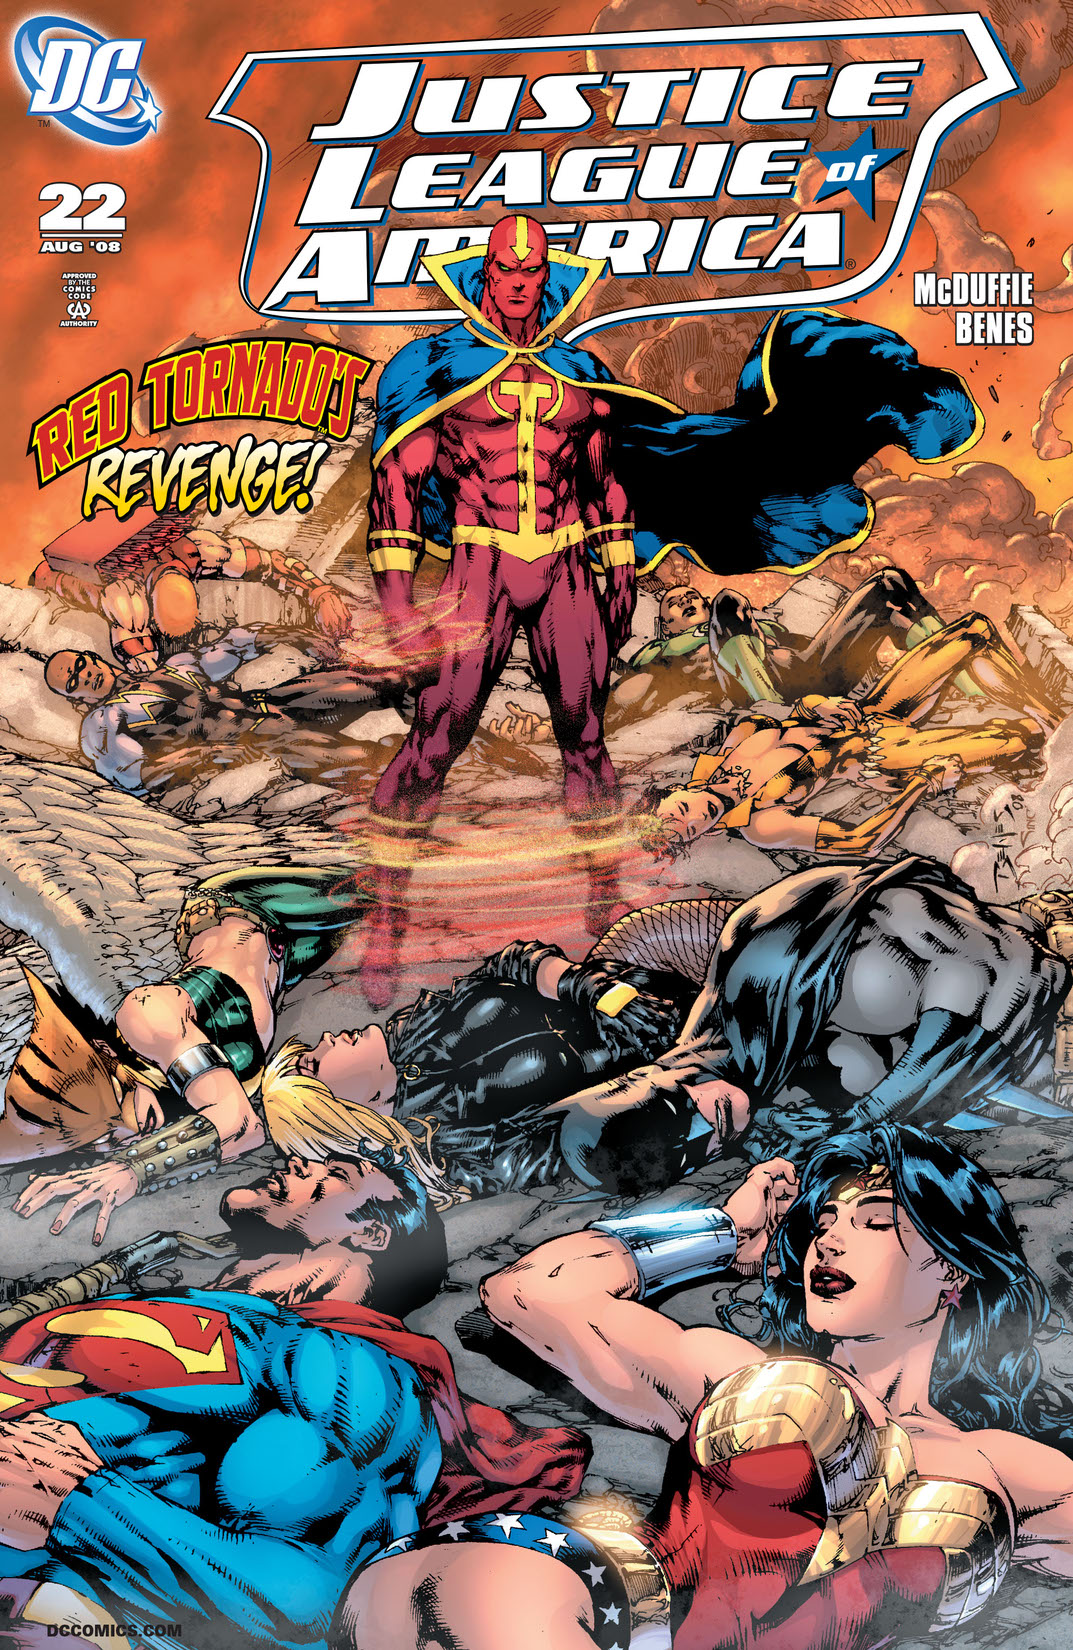 Justice League of America (2006-) #22 preview images